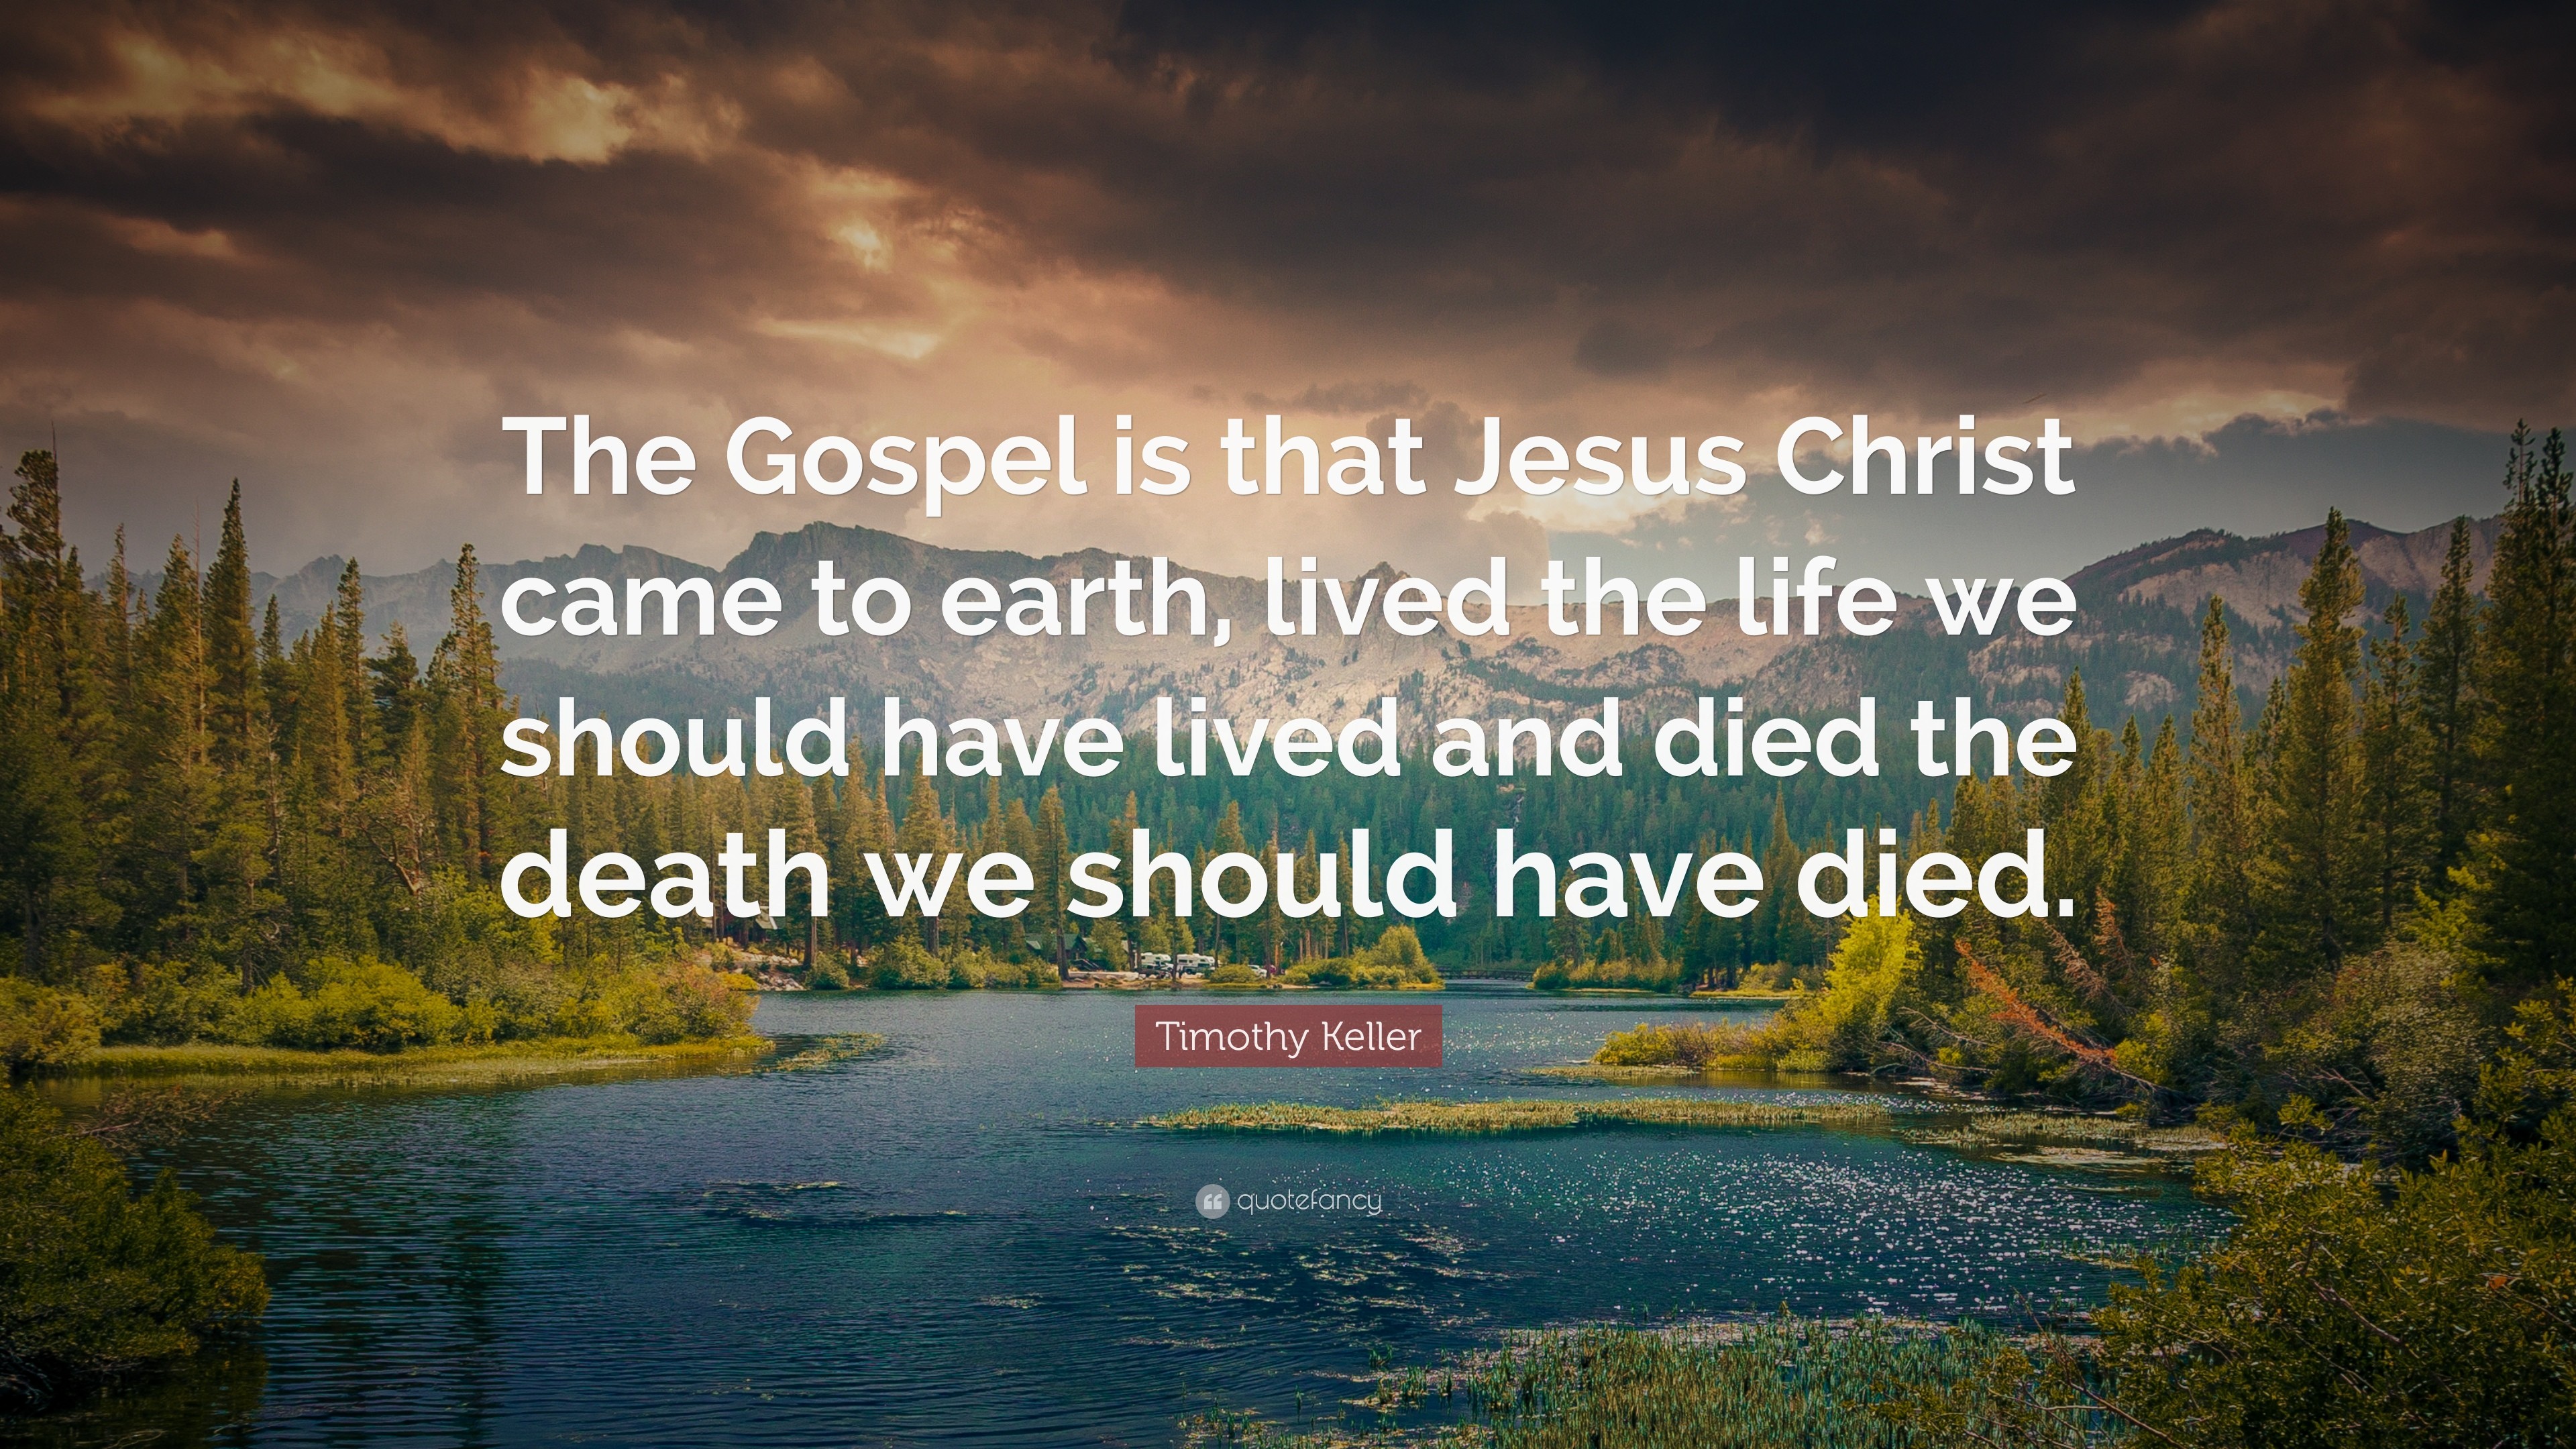 3840x2160 Timothy Keller Quote: “The Gospel is that Jesus Christ came to earth, lived